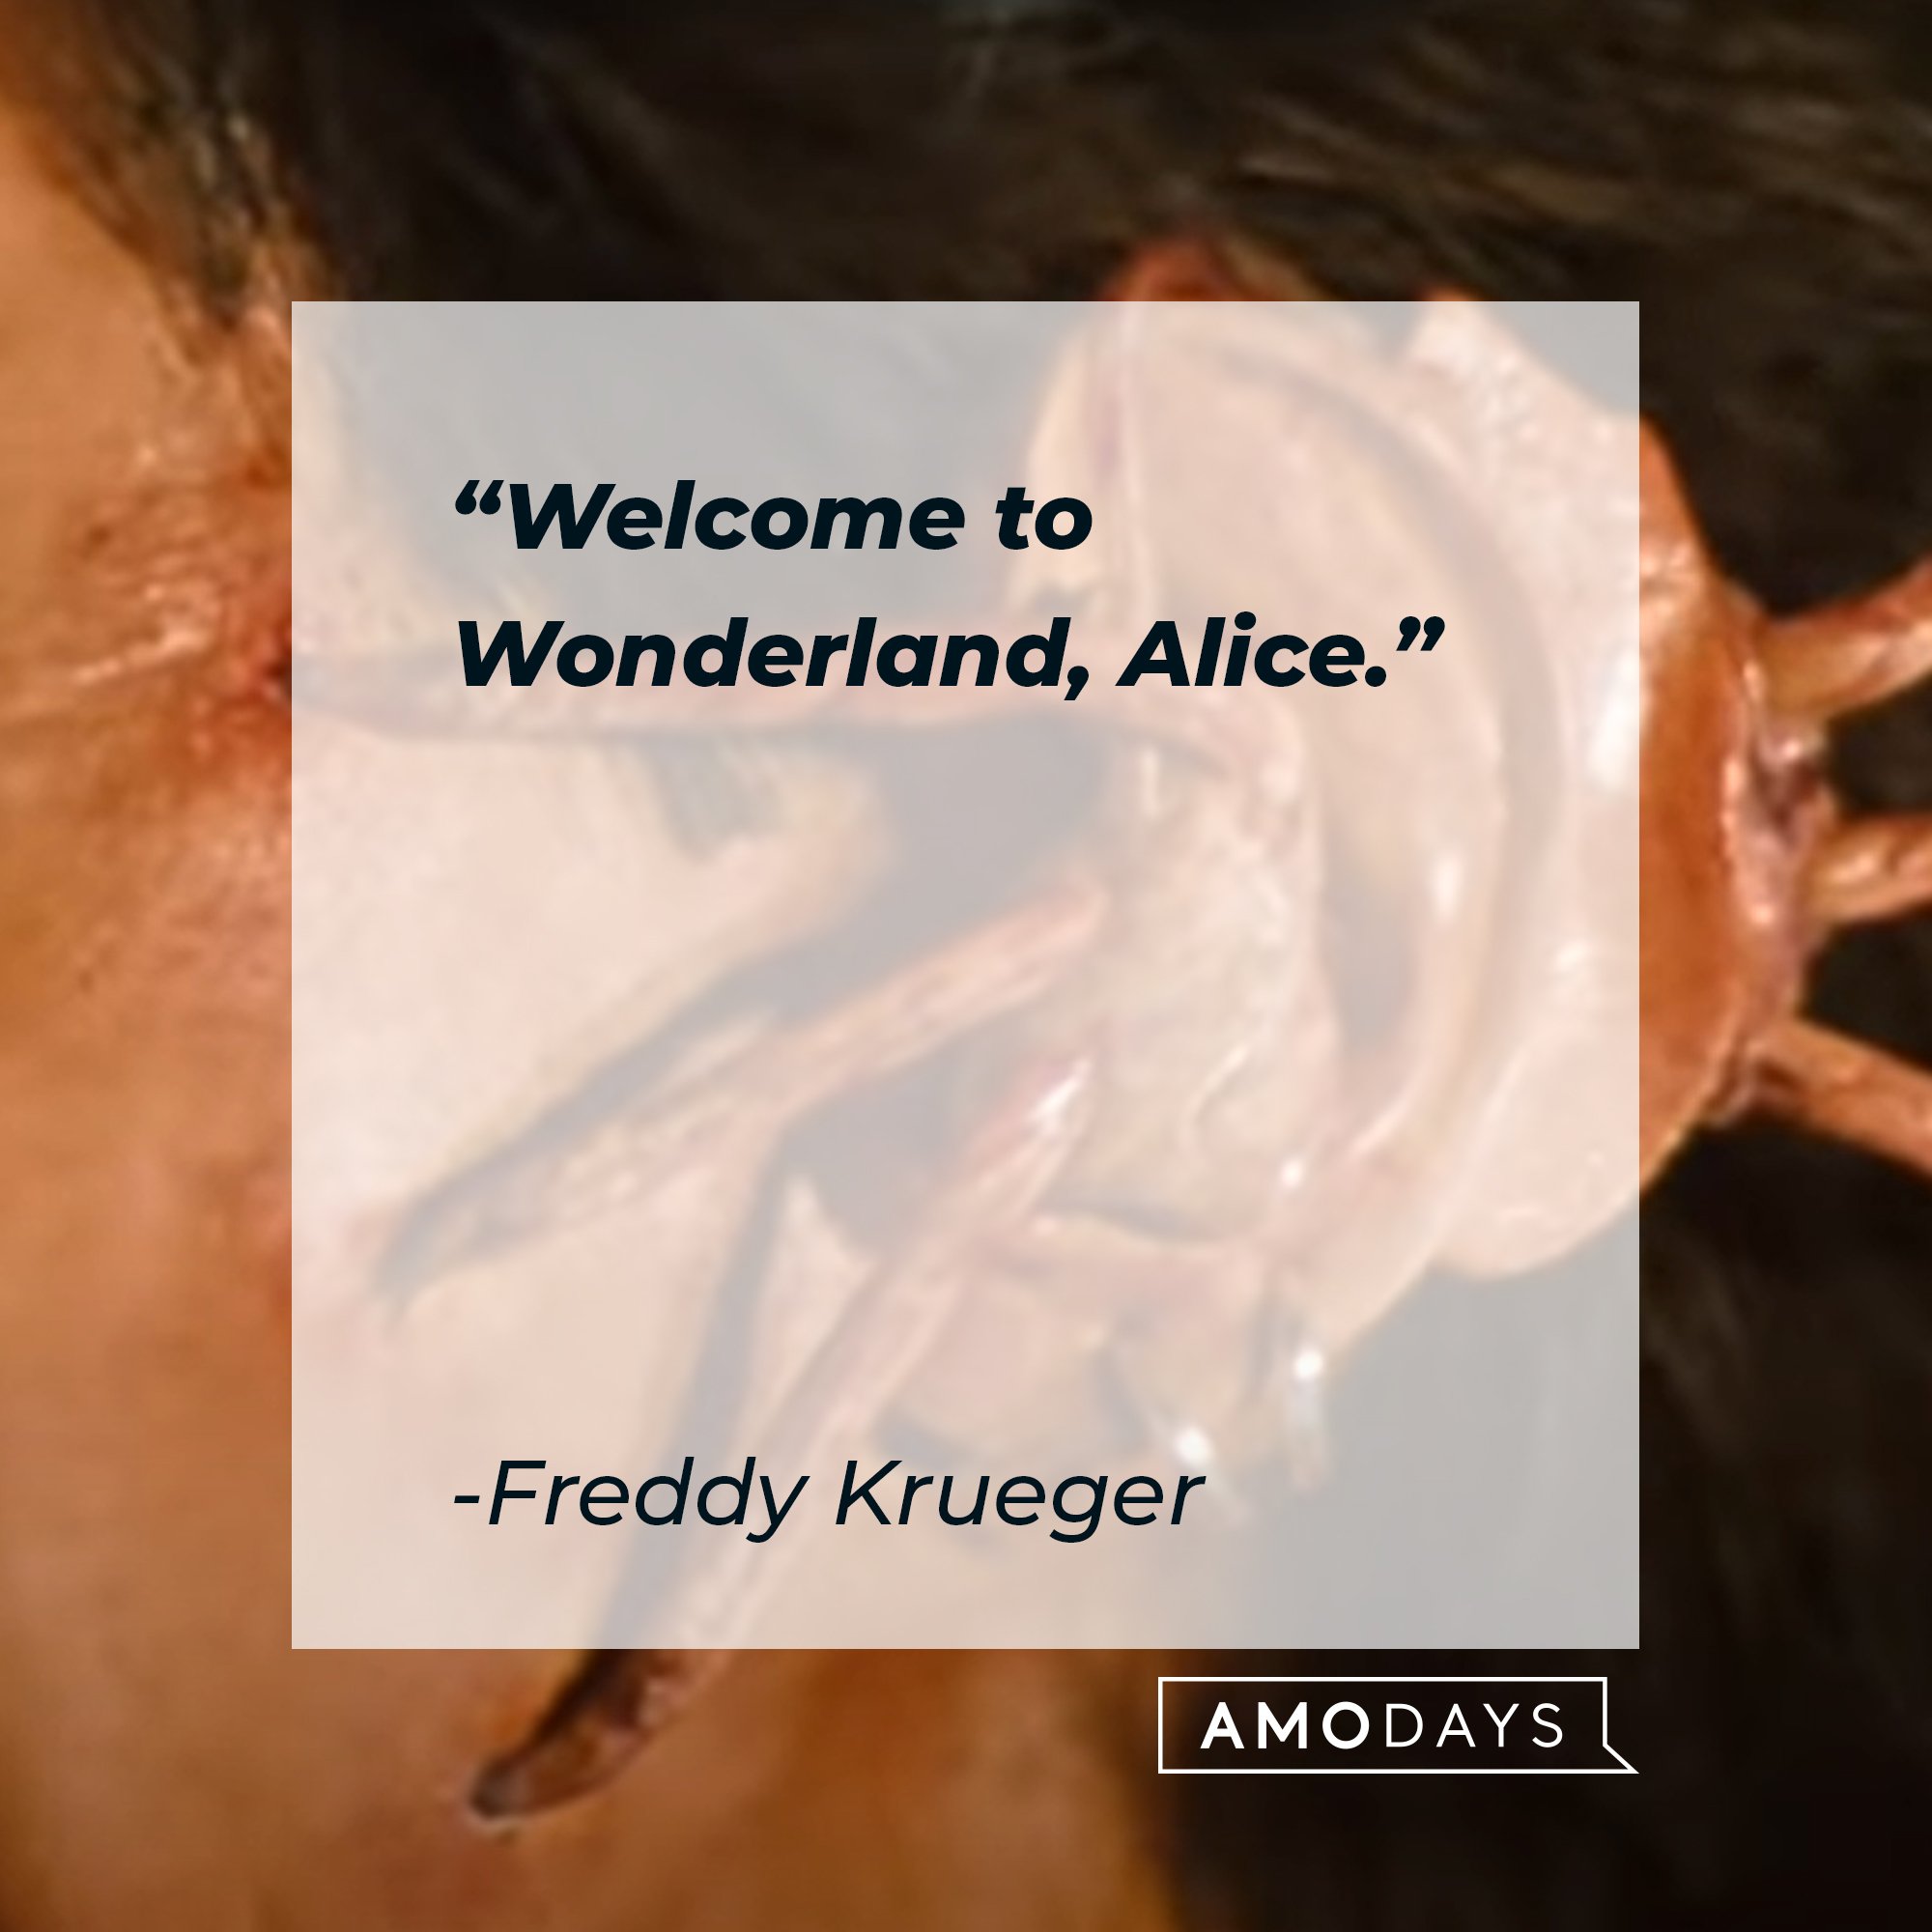 Freddy Krueger’s quote: “Welcome to Wonderland, Alice." | Image: AmoDays